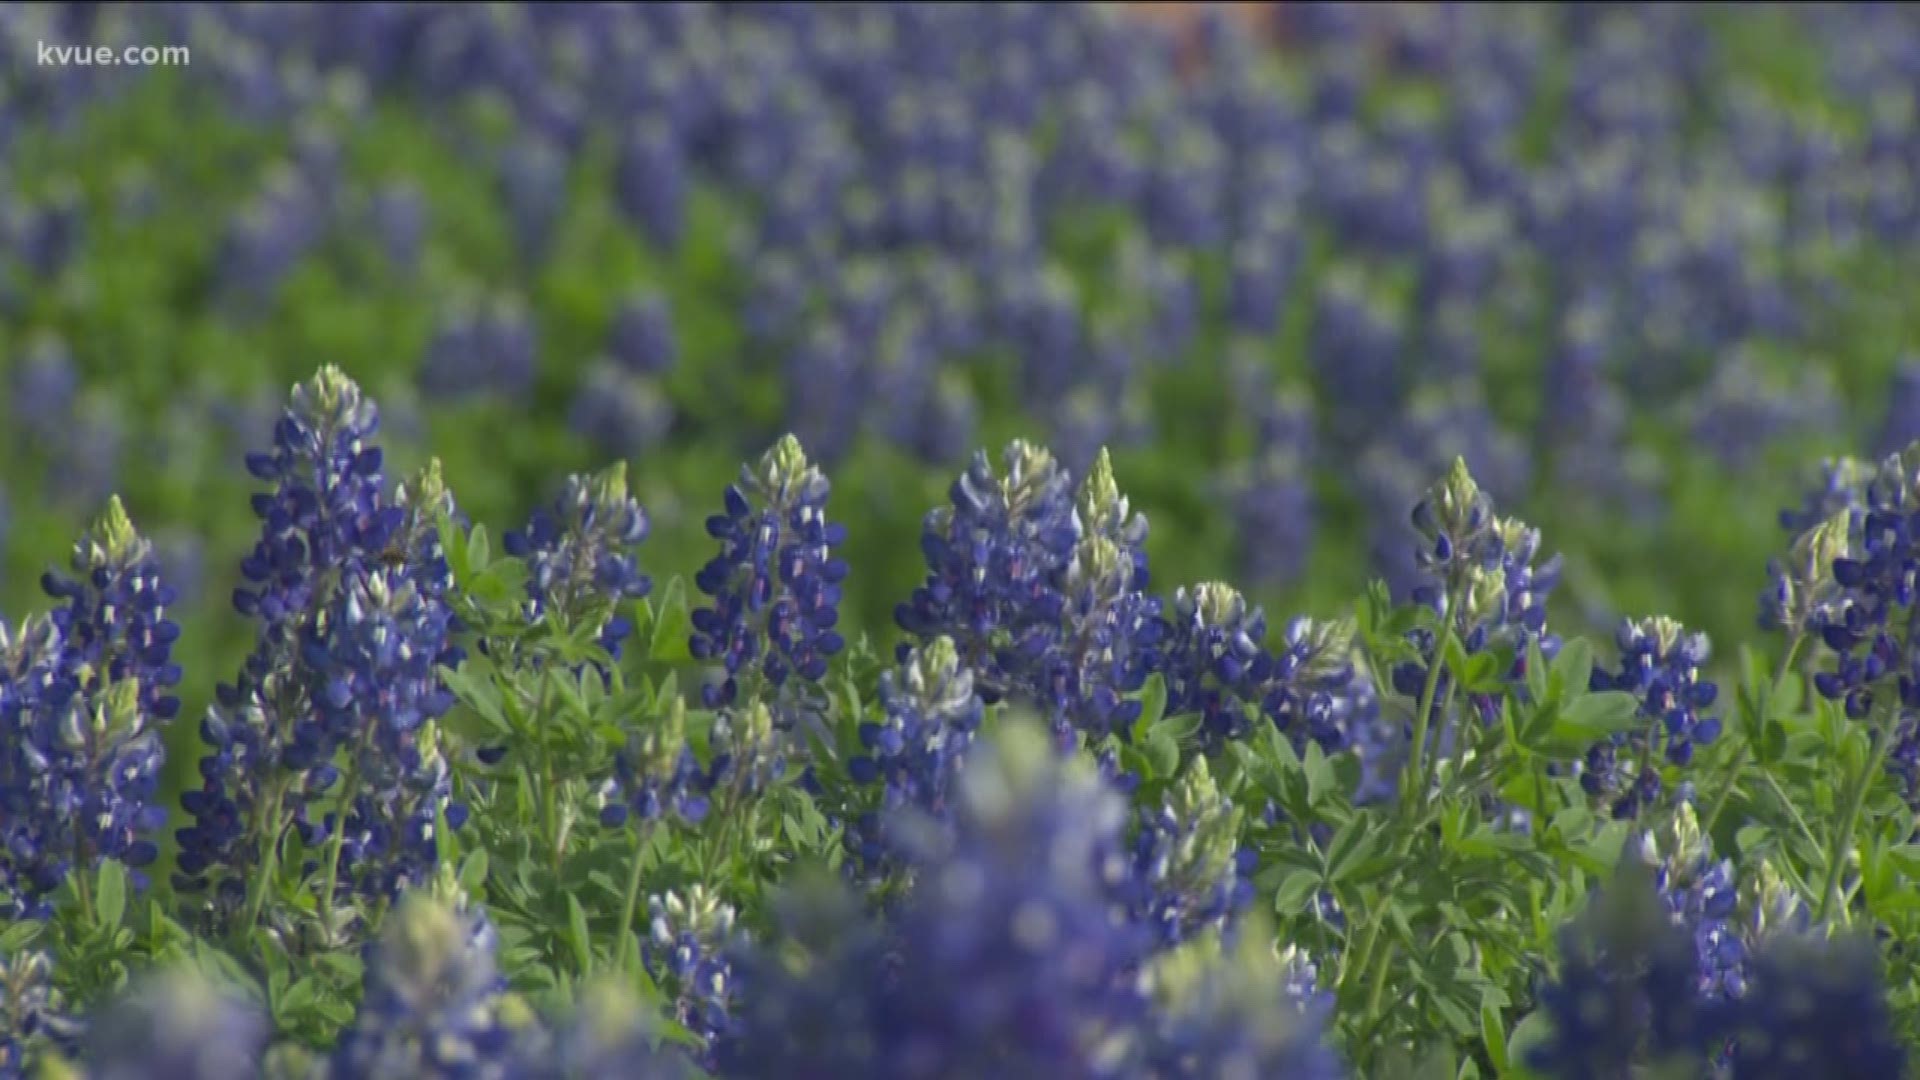 Rebeca Trejo talked with the Lady Bird Johnson Wildflower Center about how easy it is to keep bluebonnets thriving.